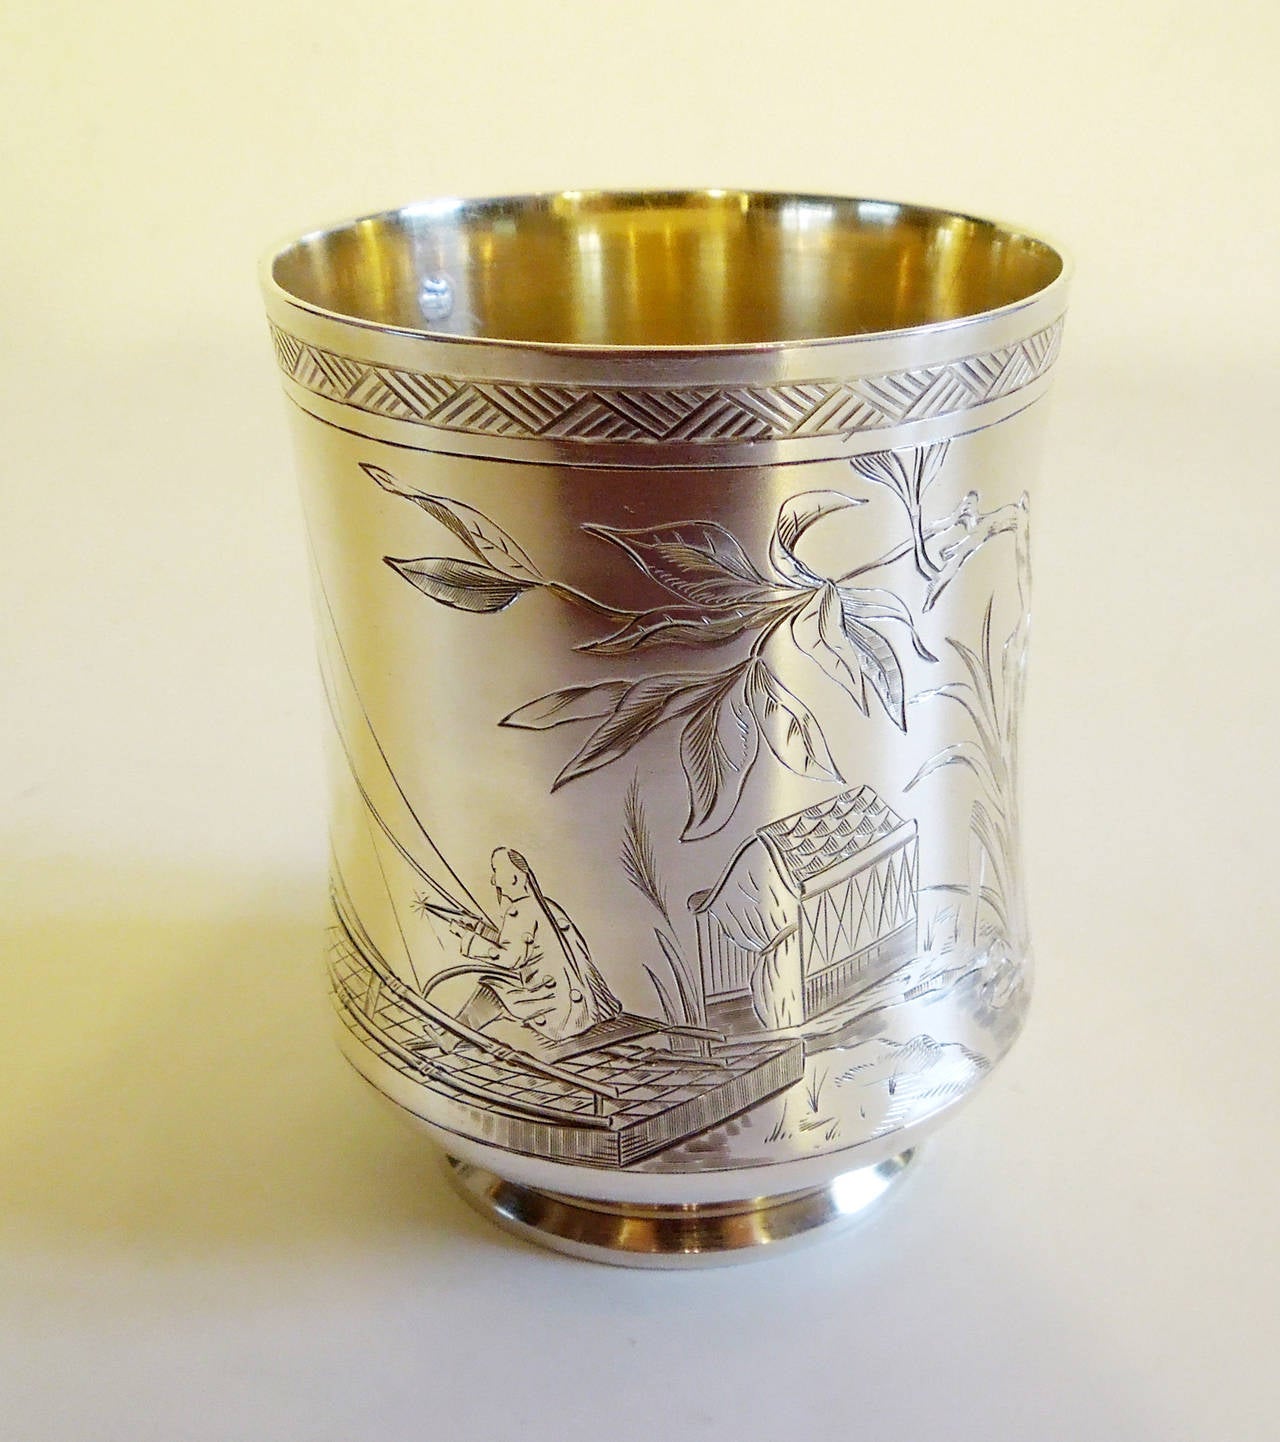 A French silver flared form silver and gilt footed goblet with engraved japonisant decoration by César Tonnellier. Fully marked with maker’s mark and silver guarantee mark. 139 g.
Tonnellier, was active from 1845 until 1882. He  made silver